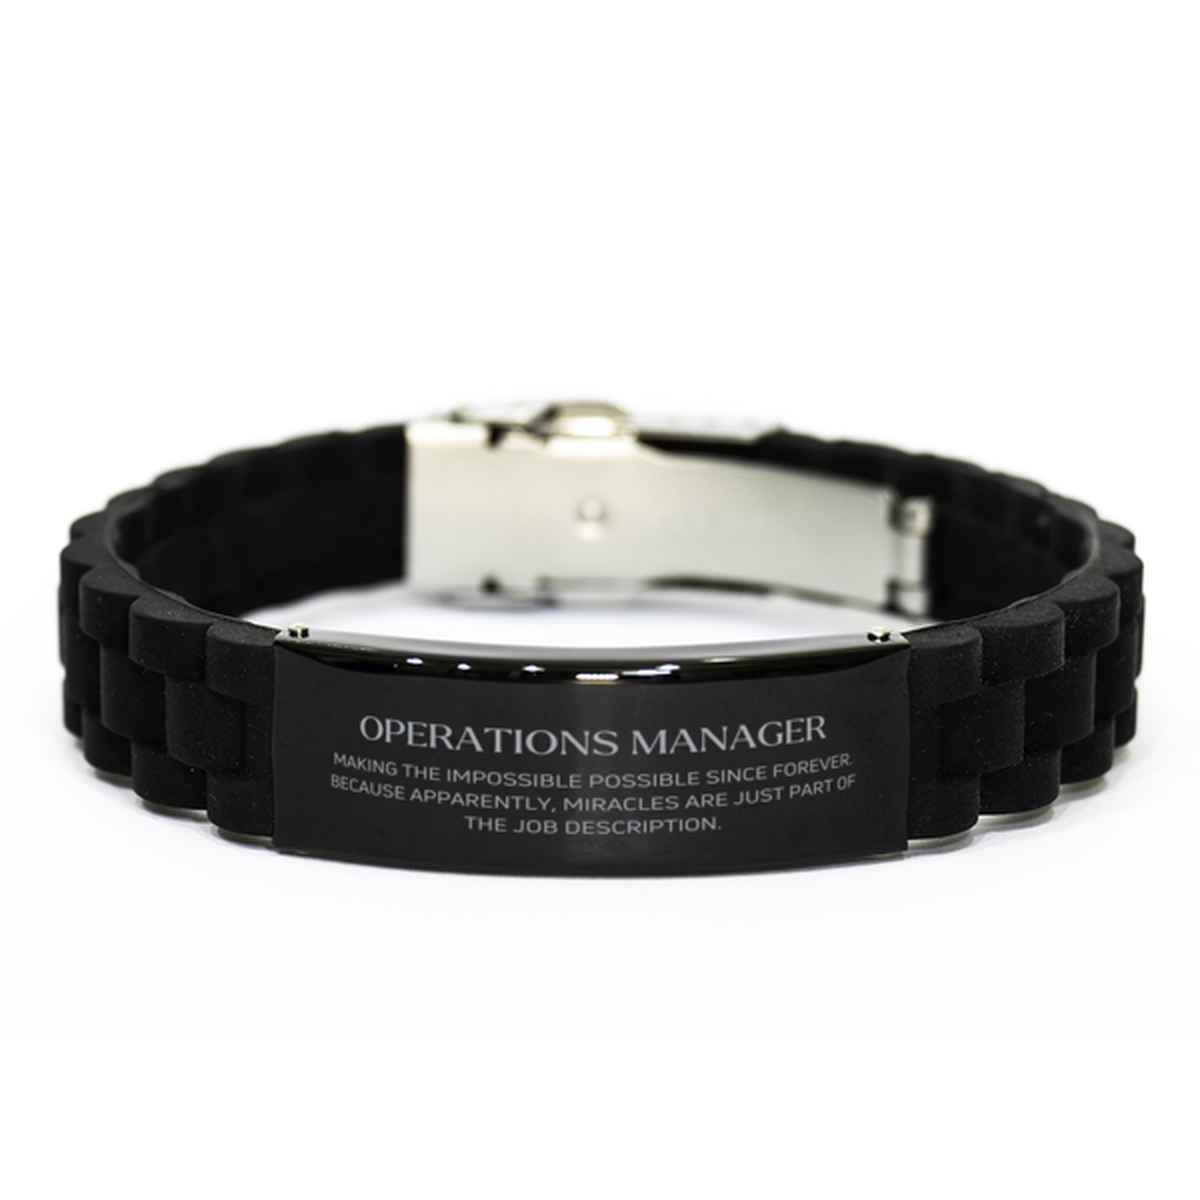 Funny Operations Manager Gifts, Miracles are just part of the job description, Inspirational Birthday Black Glidelock Clasp Bracelet For Operations Manager, Men, Women, Coworkers, Friends, Boss